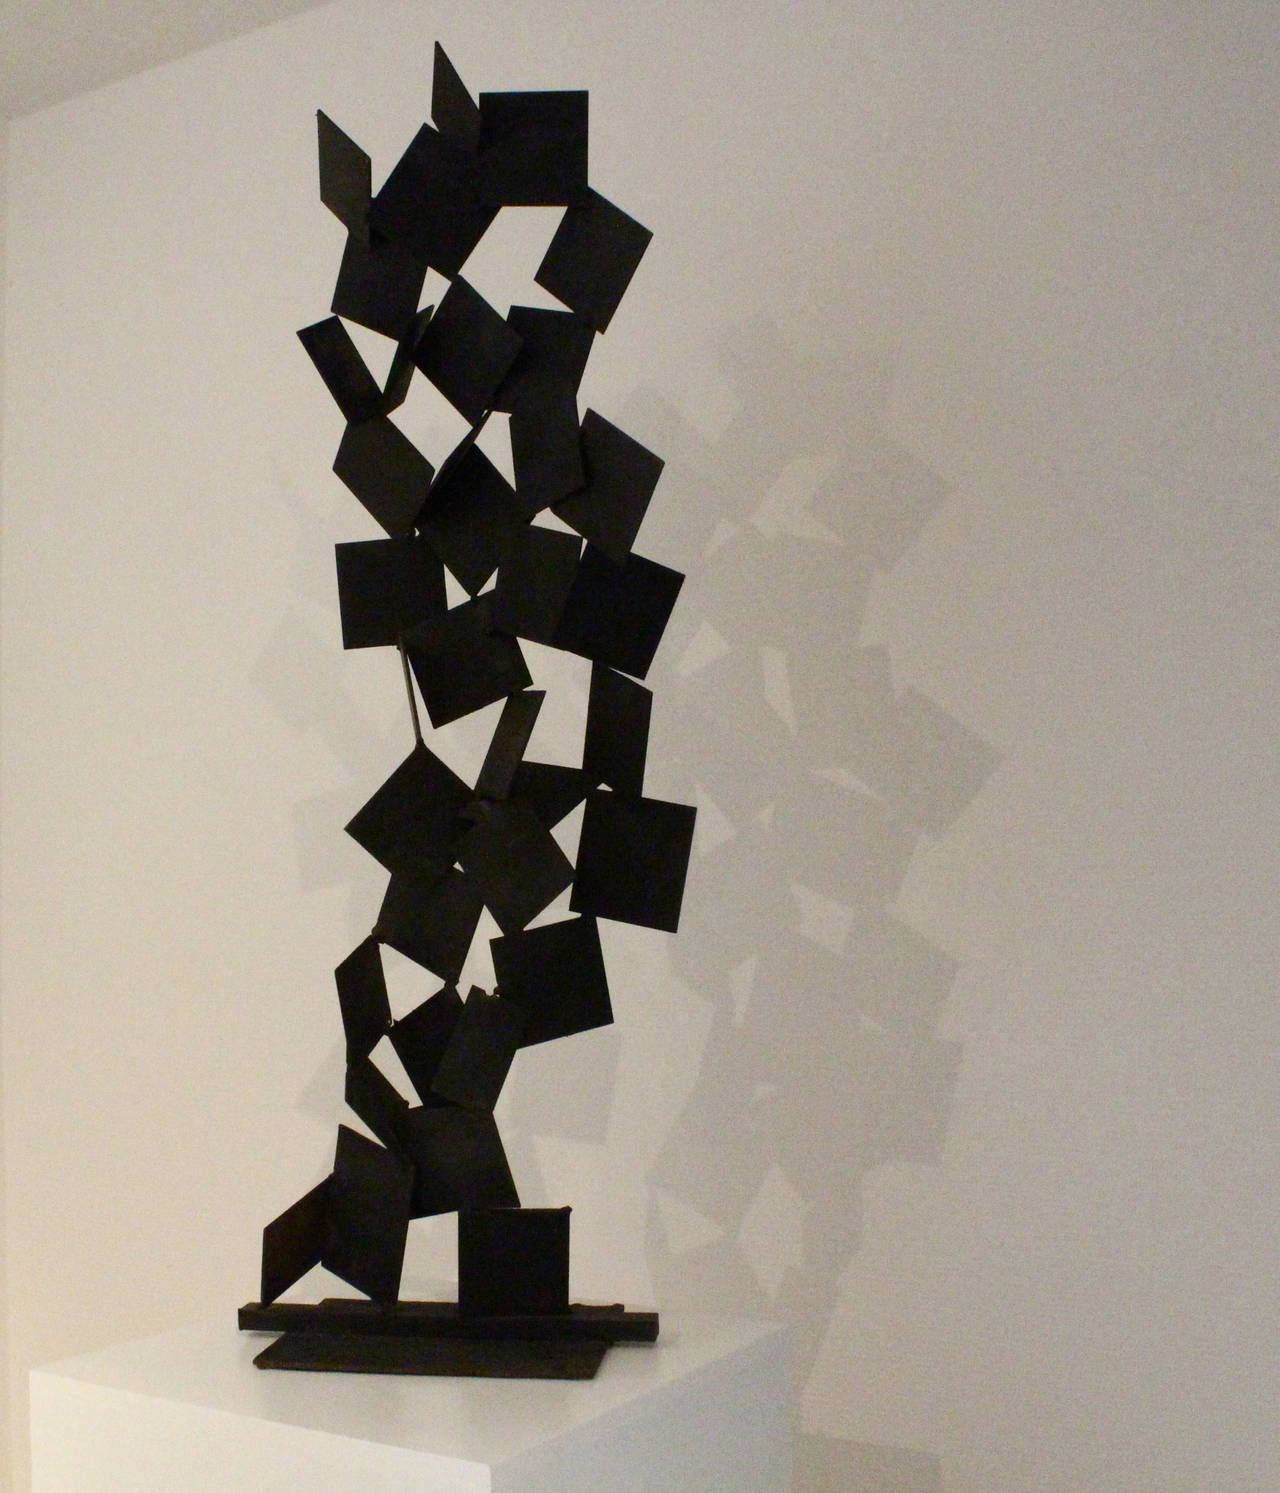 Large Abstract Style Iron Metal Work Sculpture with a Black Patina. Brutalist Style.

Worldwide shipping possibilities.